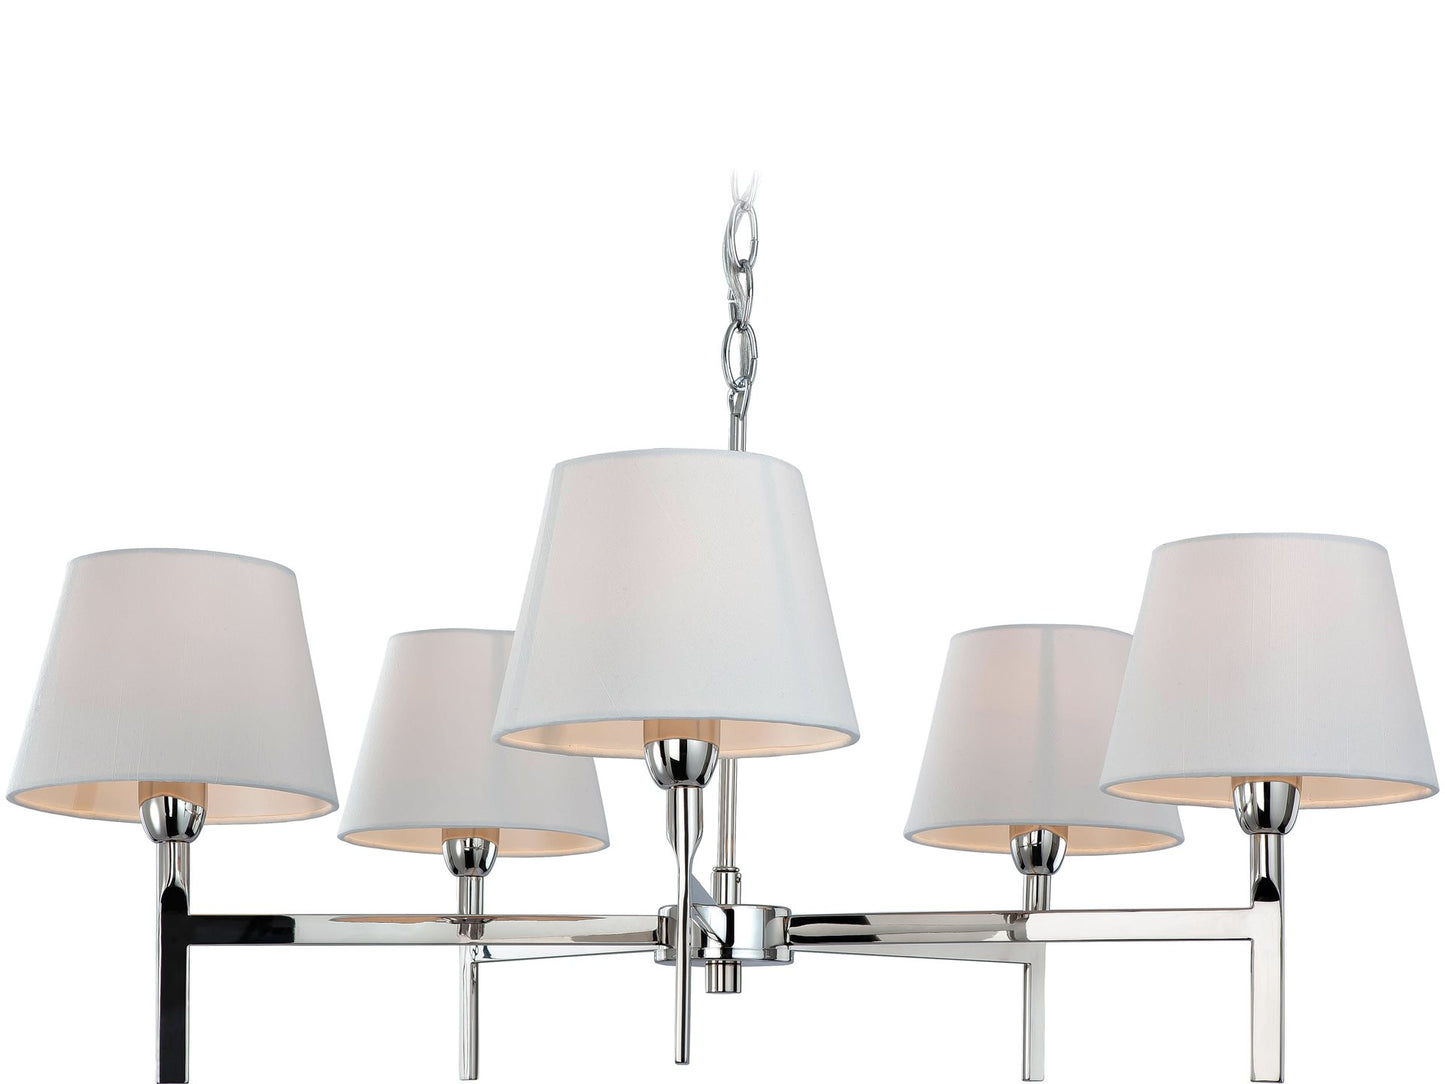 Transition 5 Light Fitting Polished Stainless Steel with Cream Shades